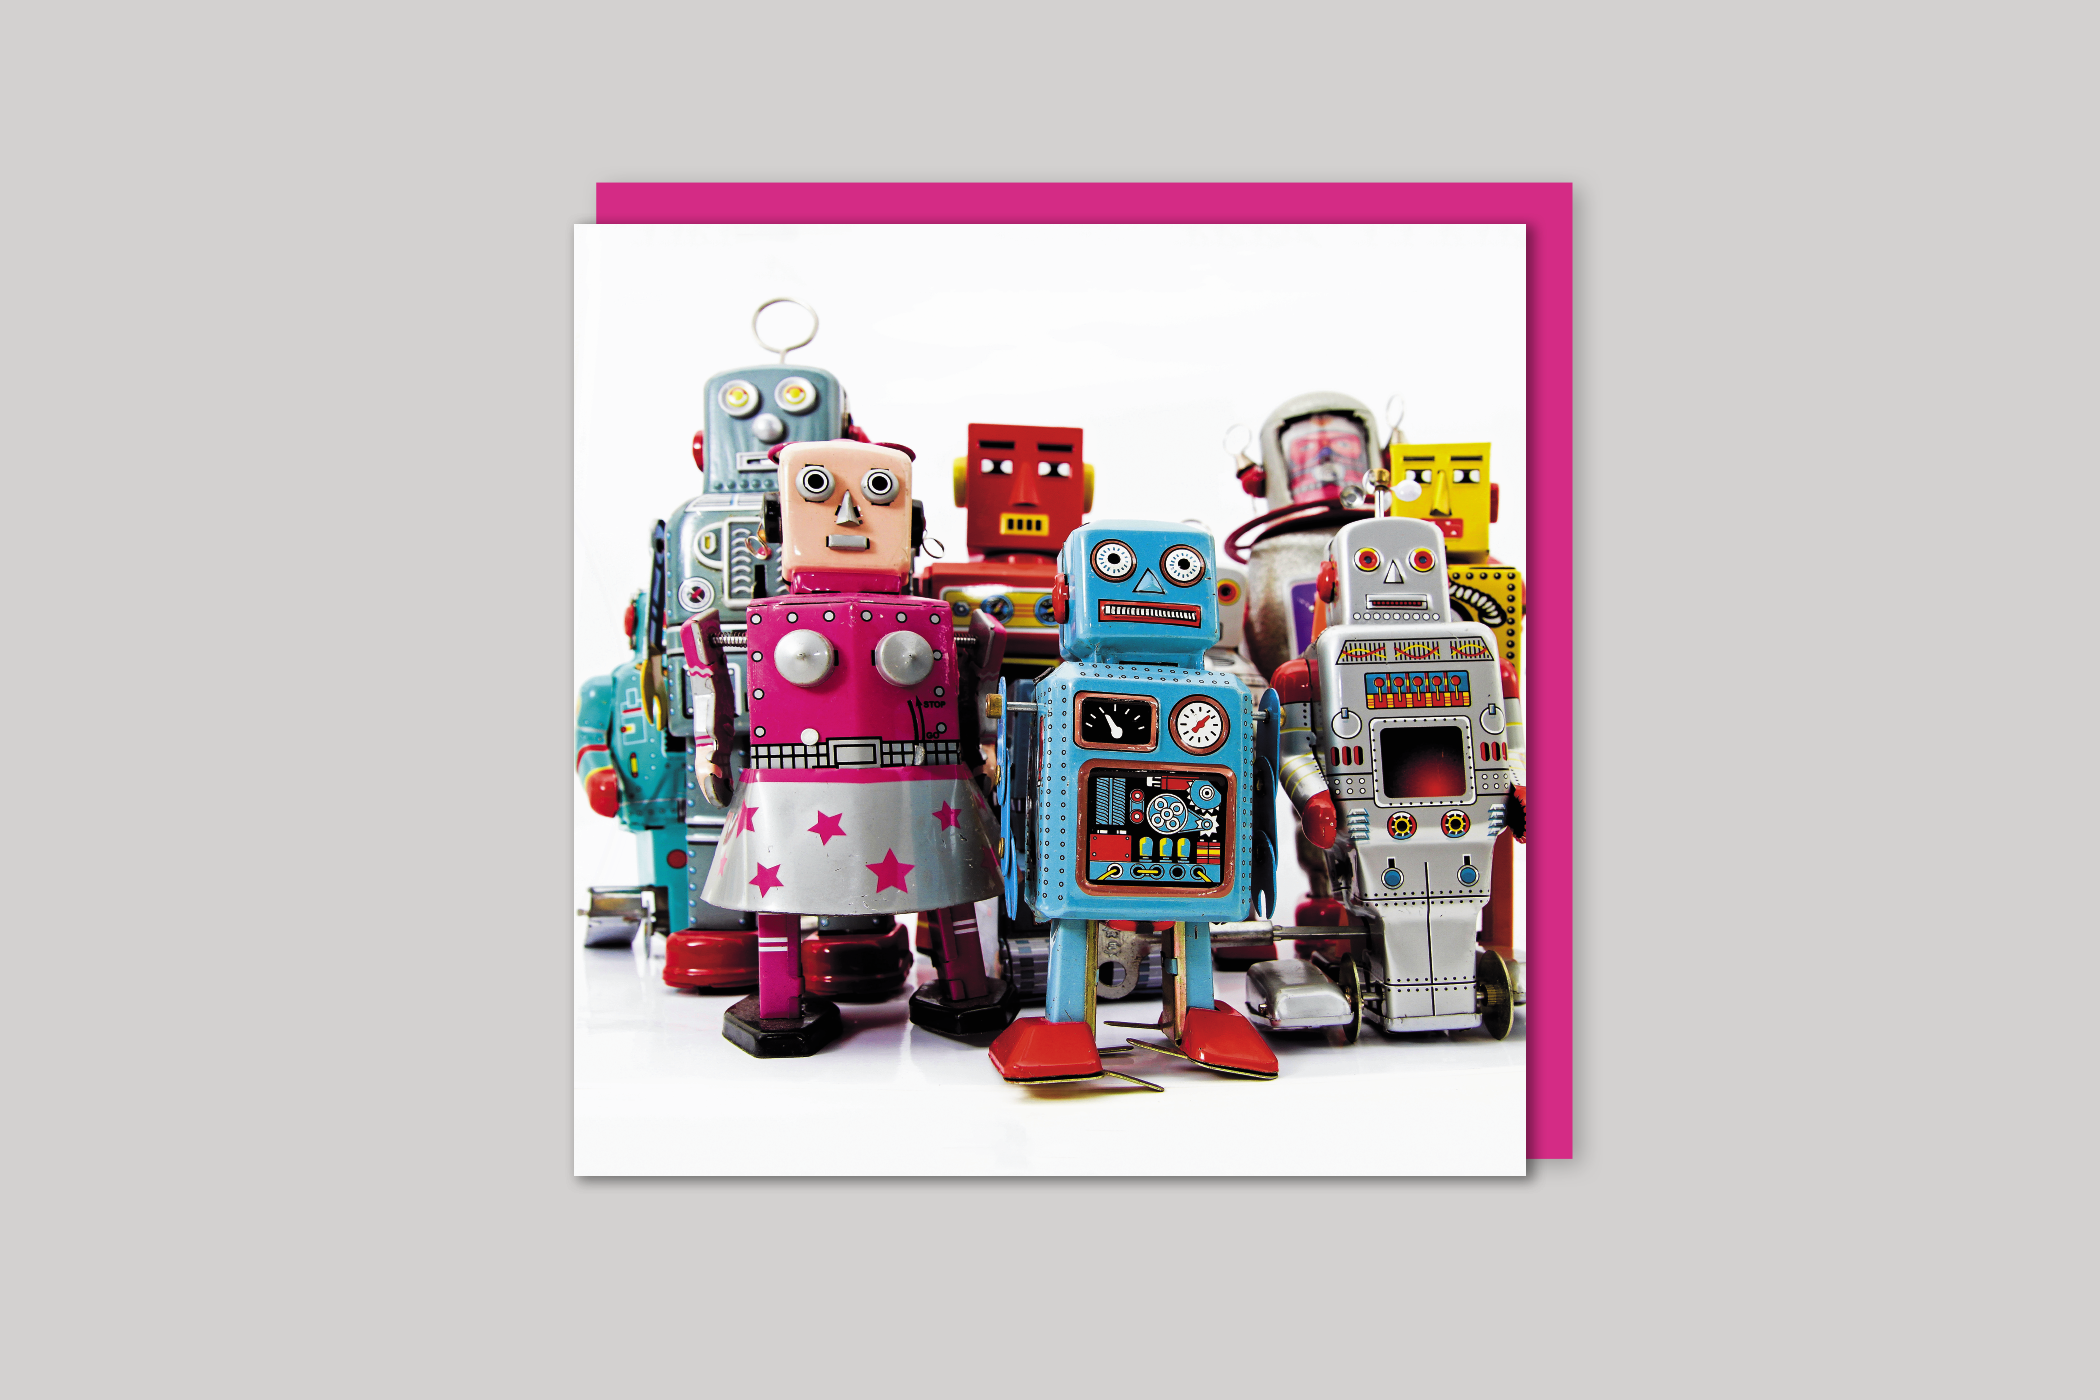 Retro Robots from Exposure range of photographic cards by Icon, back page.